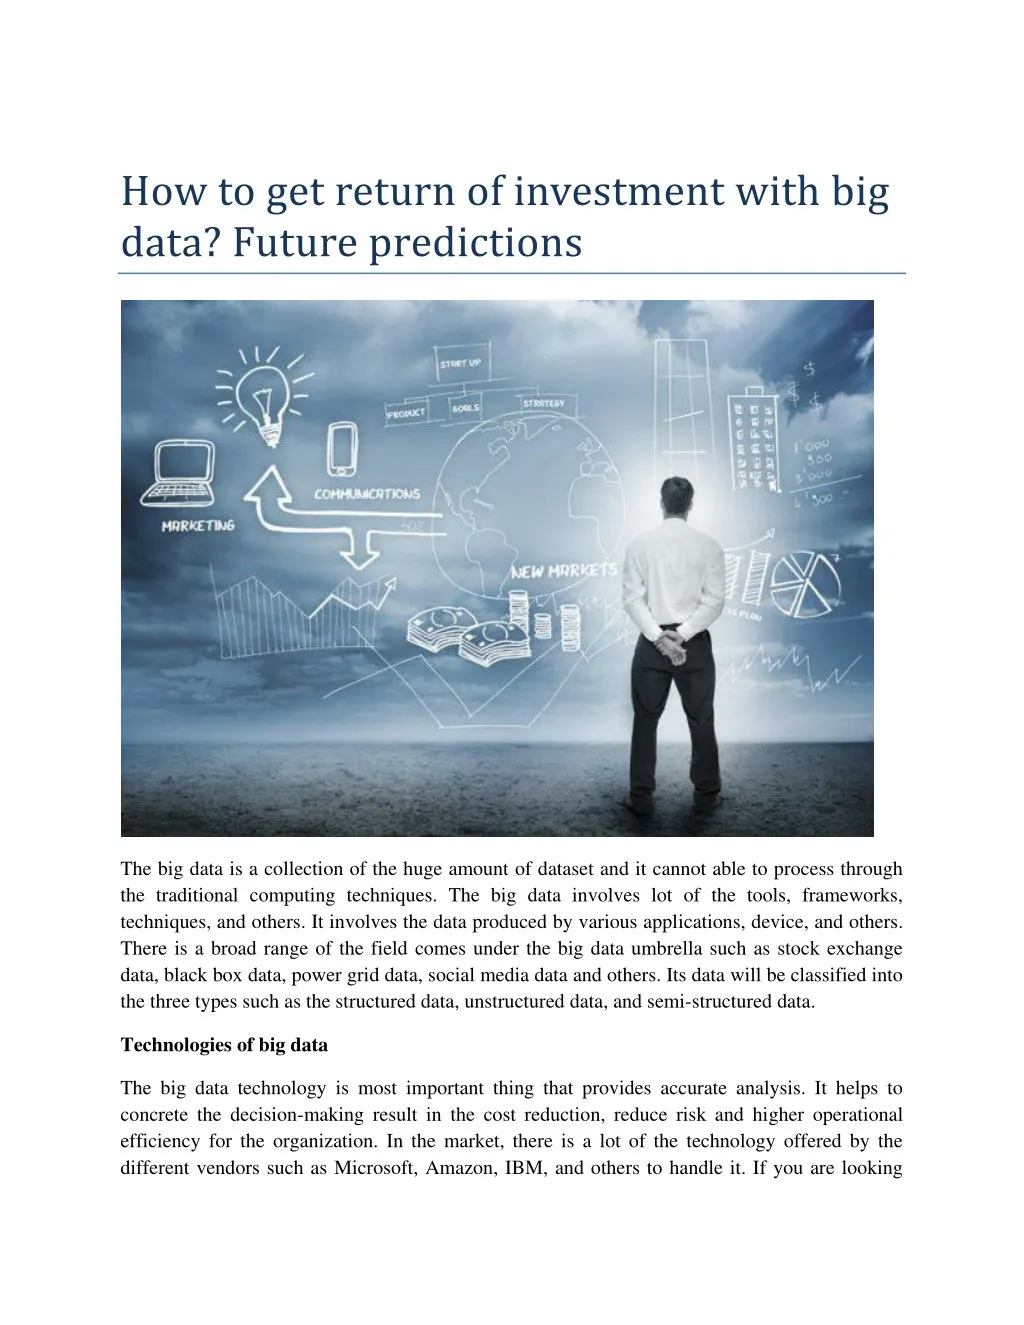 how to get return of investment with big data